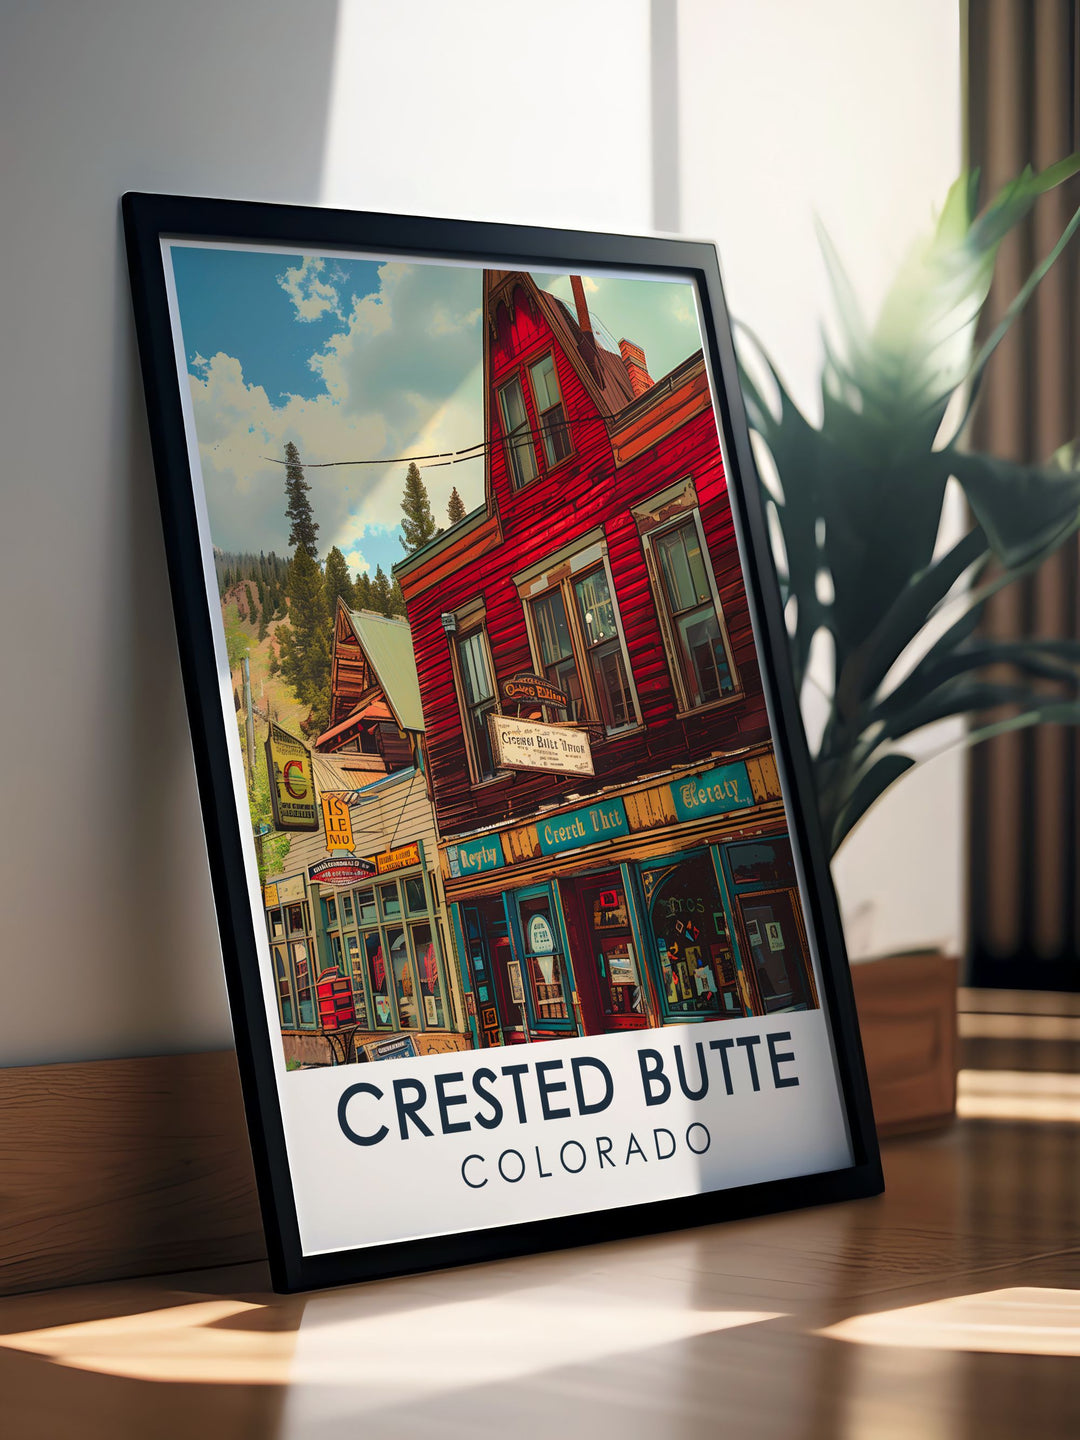 Crested Butte Mountain Resort artwork capturing the essence of the Colorado Rockies with detailed illustrations and vivid colors perfect for creating an inviting and inspiring atmosphere in your living space or as a unique gift for friends and family.